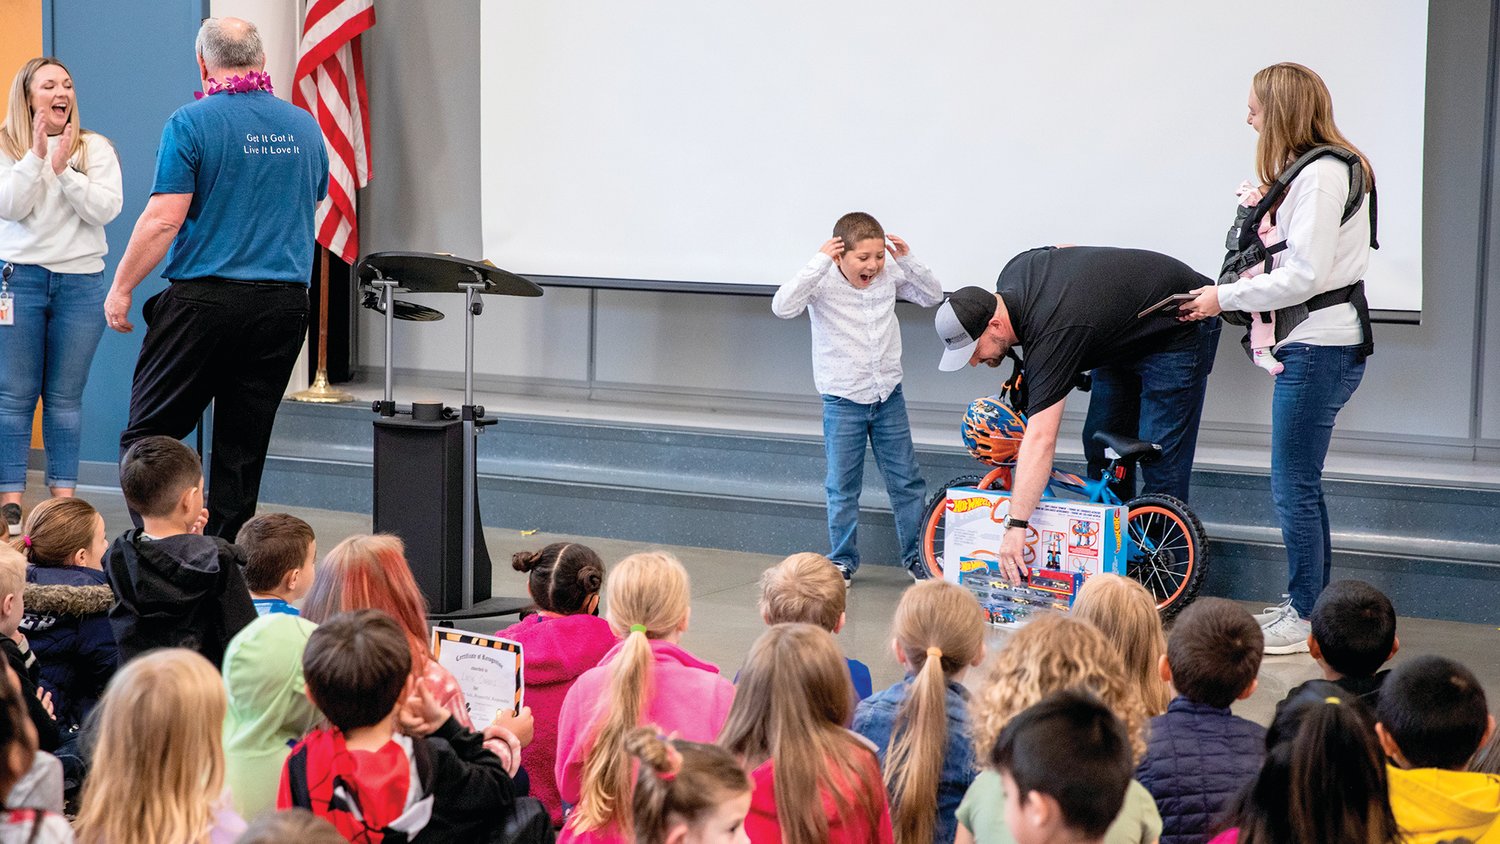 Yoe Rivas reacts as he is given a bike and Hot Wheels toys after being named the Noah Markstrom Award recipient Friday at Fords Prairie Elementary in Centralia.